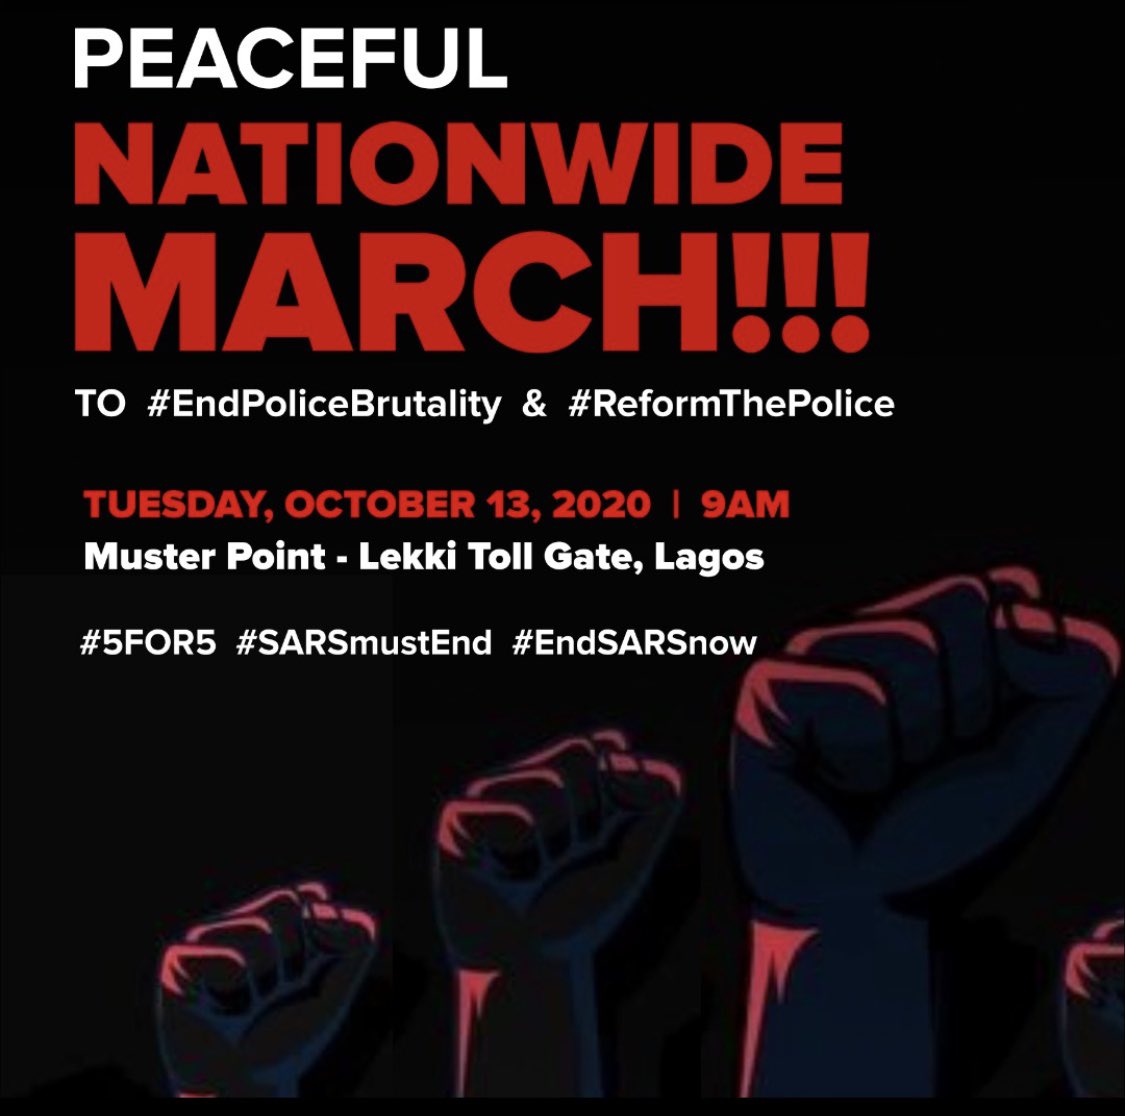 Apparently general consensus is Muri isn’t a safe meeting point 🤷🏾‍♂️. Oya we move, link up at toll gate instead! Let’s stay together!!  #5for5 #EndPoliceBrutality #SARSMUSTEND